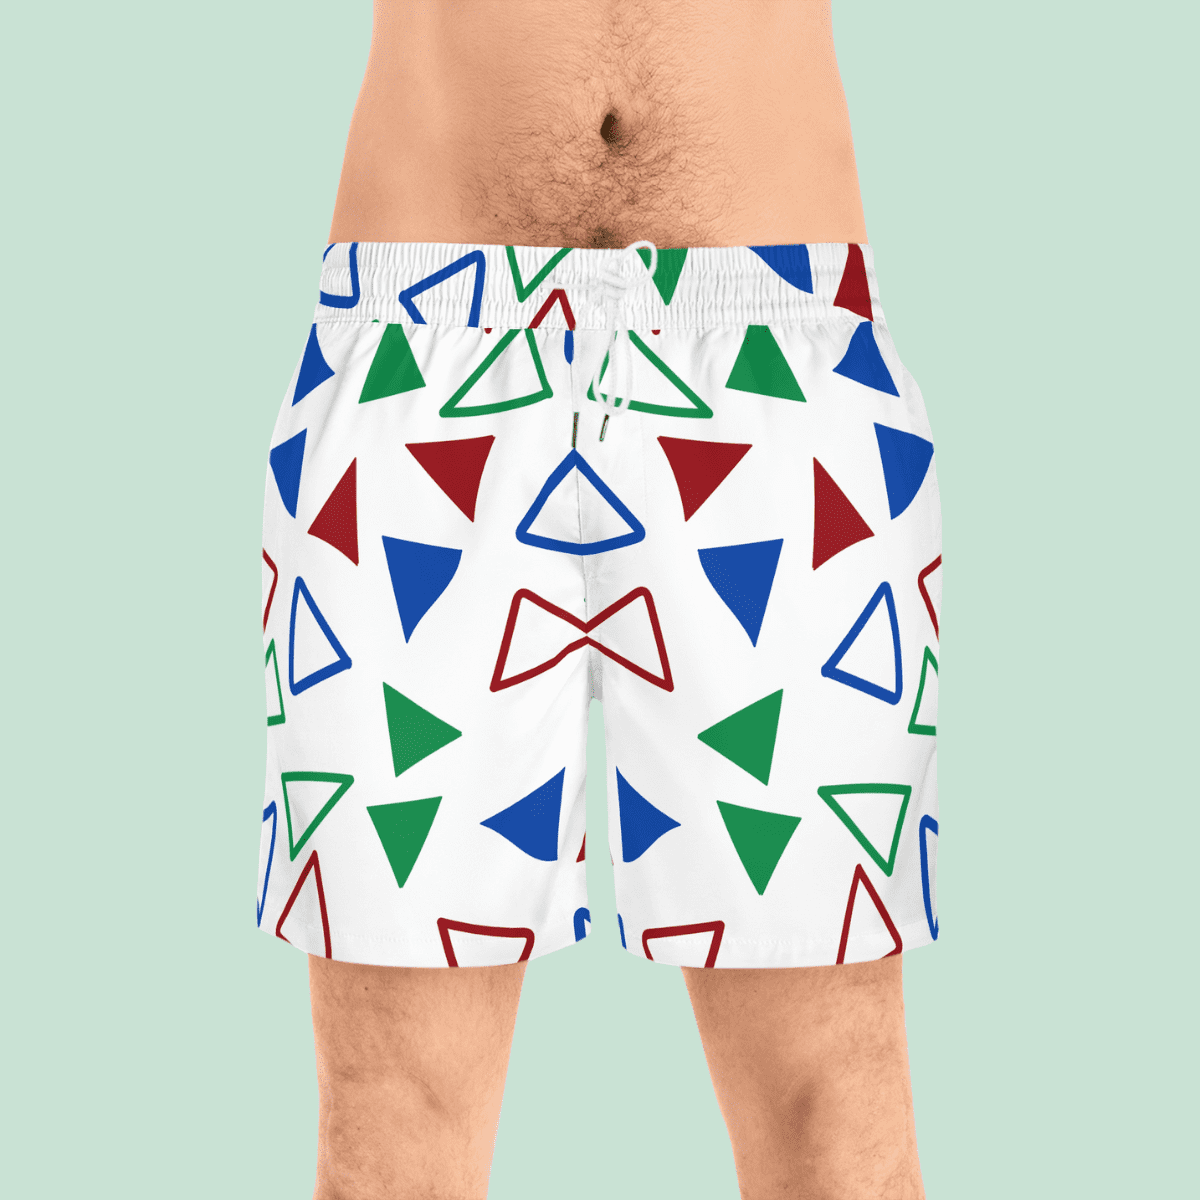 Men's White And Colored Triangle Fitness Shorts